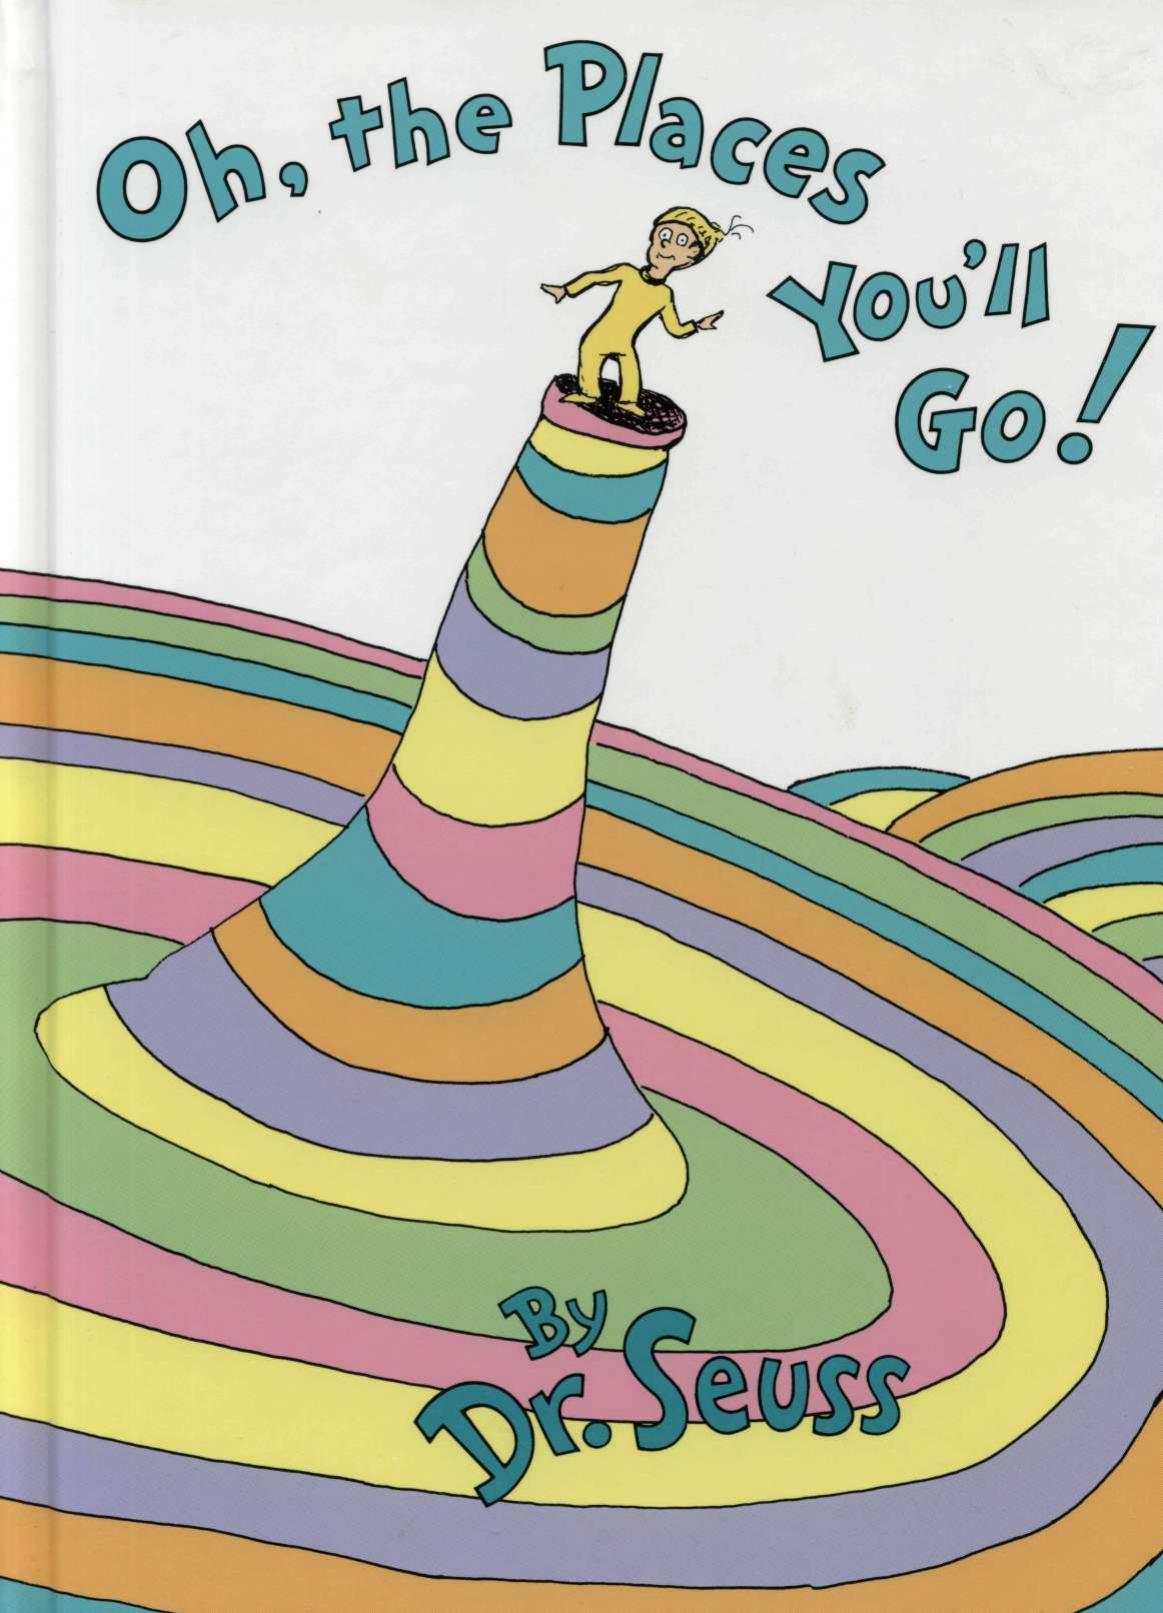 1990 - Oh, The Places You'll Go by Dr. Seuss